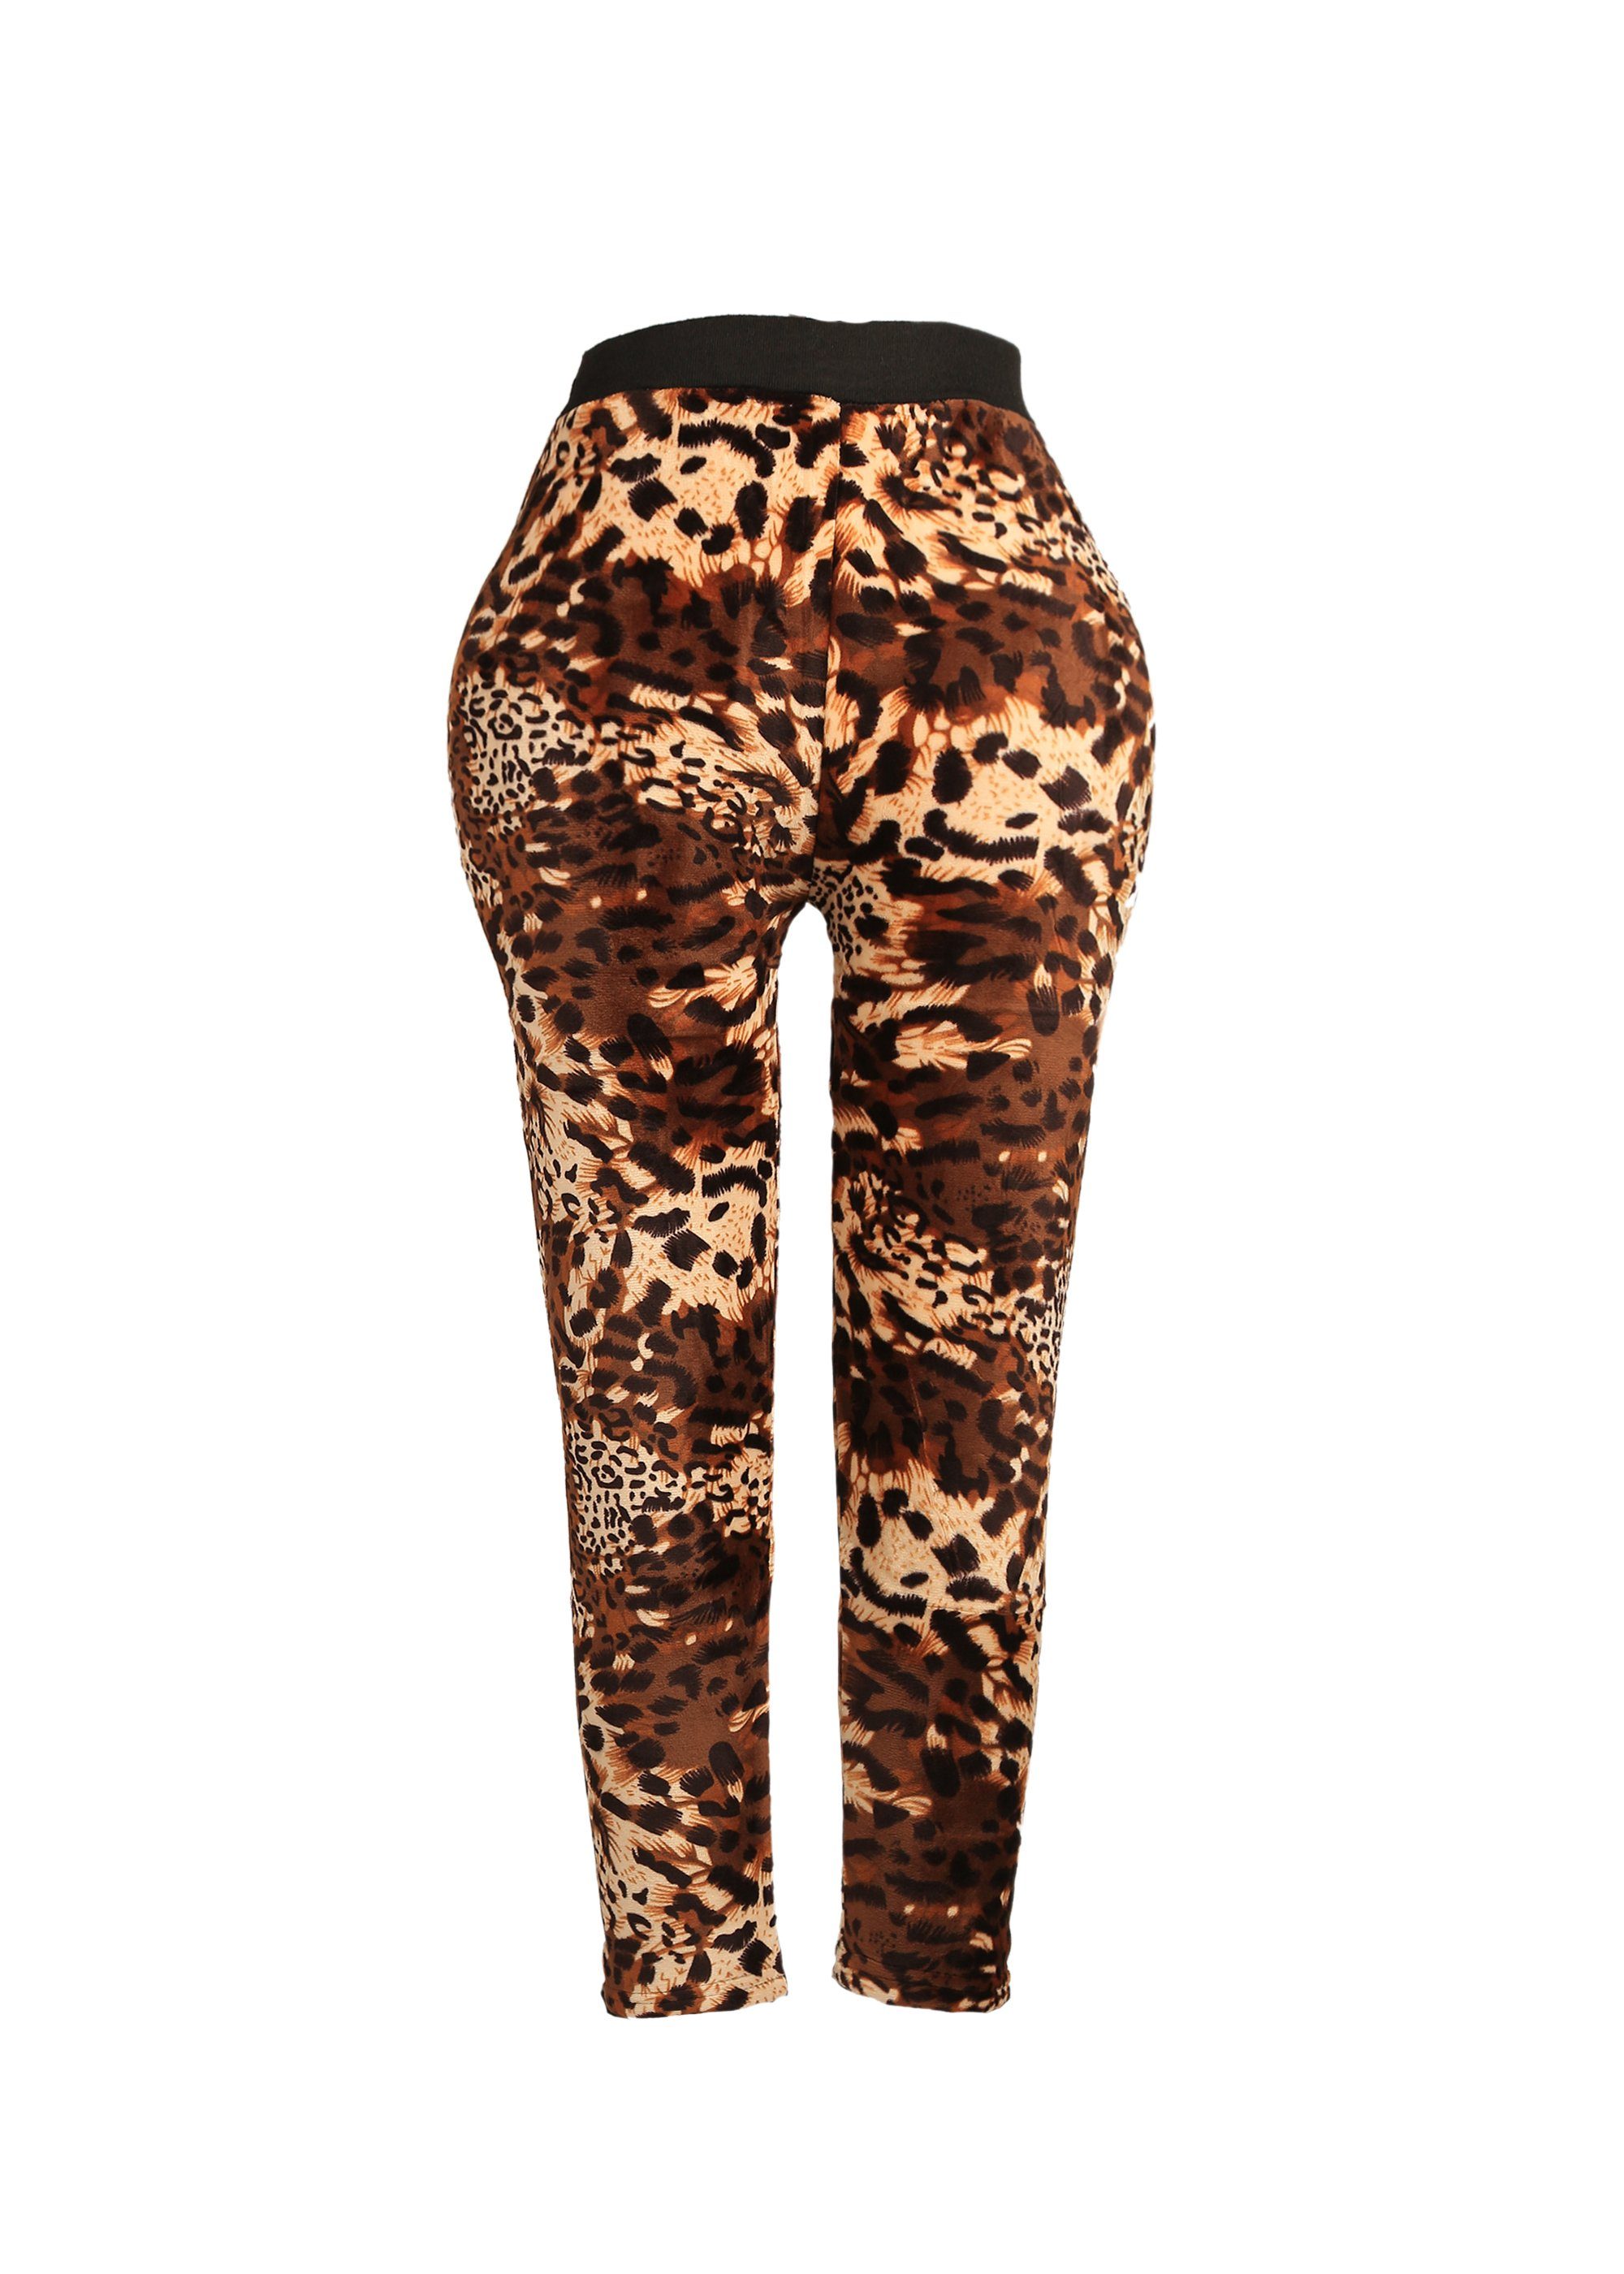 mit Trends Family Thermoleggings Leopardenmuster coolem